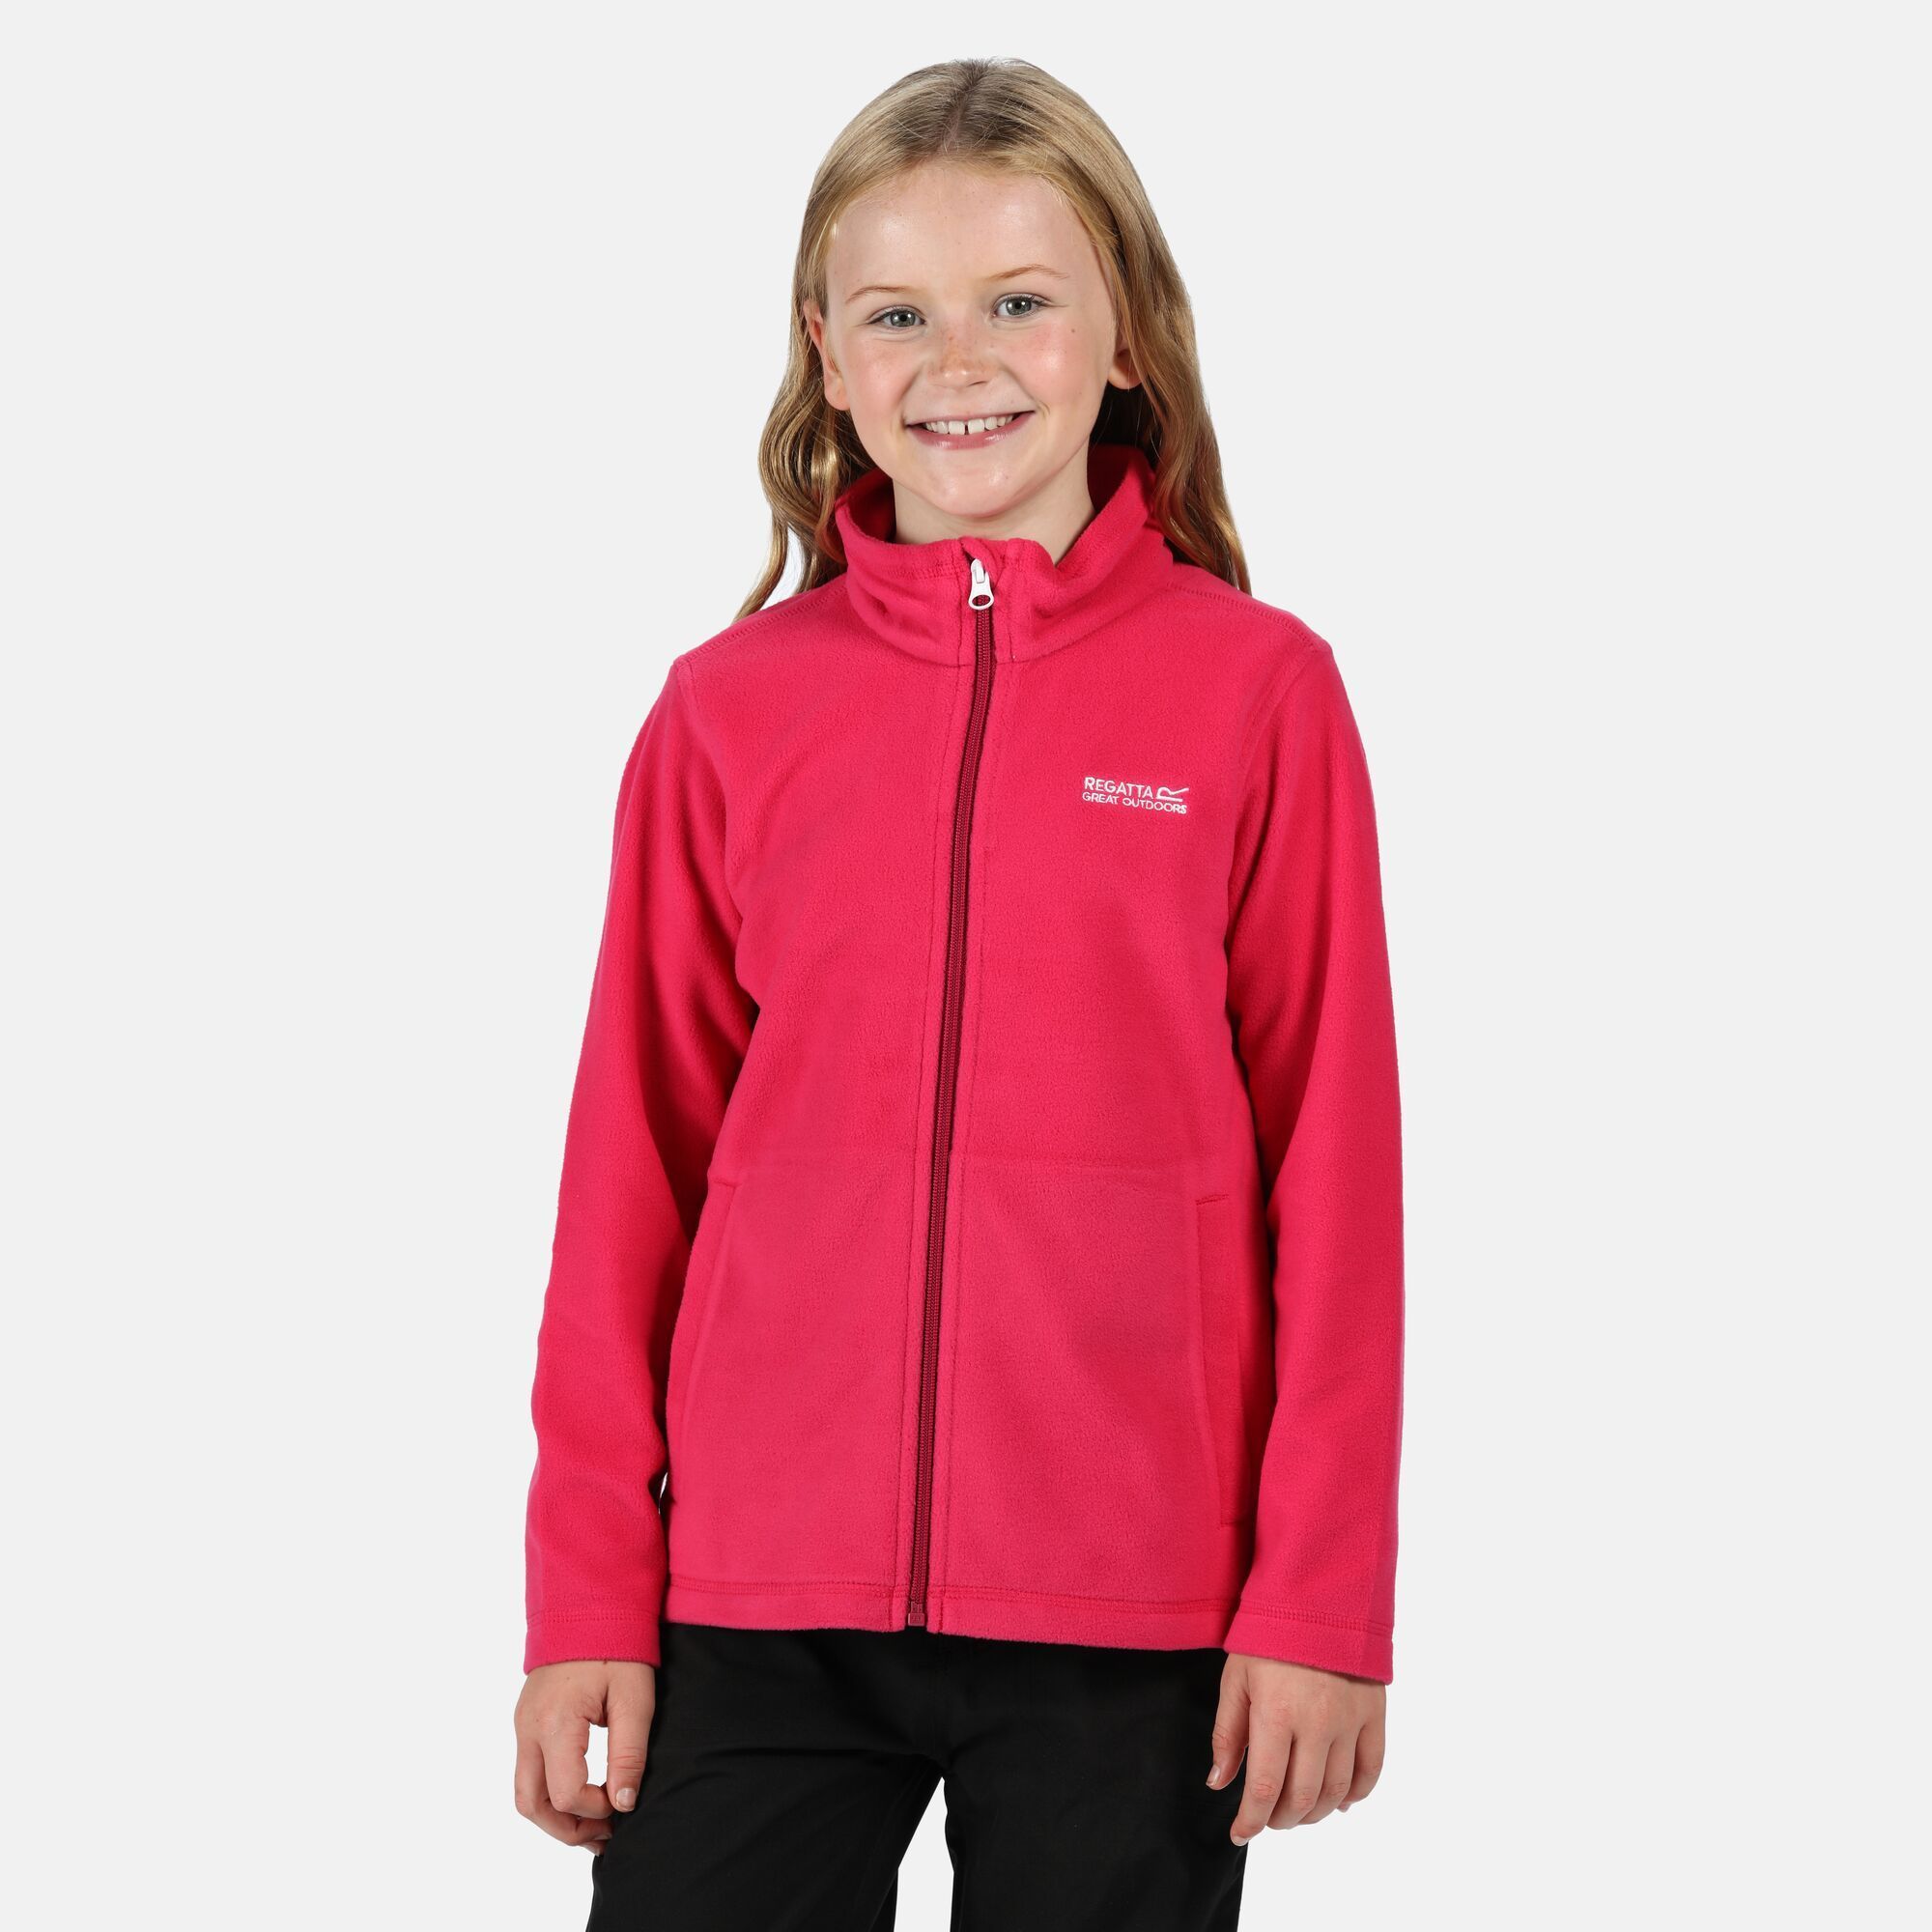 The King is our kids lighter weight zip through fleece. Its lovely and light, super soft and has an anti-pill finish to keep it looking fresh wear after wear. One of our best selling kids styles, its an outside essential must have you can trust to keep them comfy and warm, whether they are climbing trees, on the school run or playing around the garden. 100% Polyester. Regatta Kids Sizing (chest approx): 2 Years (53-55cm), 3-4 Years (55-57cm), 5-6 Years (59-61cm), 7-8 Years (63-67cm), 9-10 Years (69-73cm), 11-12 Years (75-79cm), 32